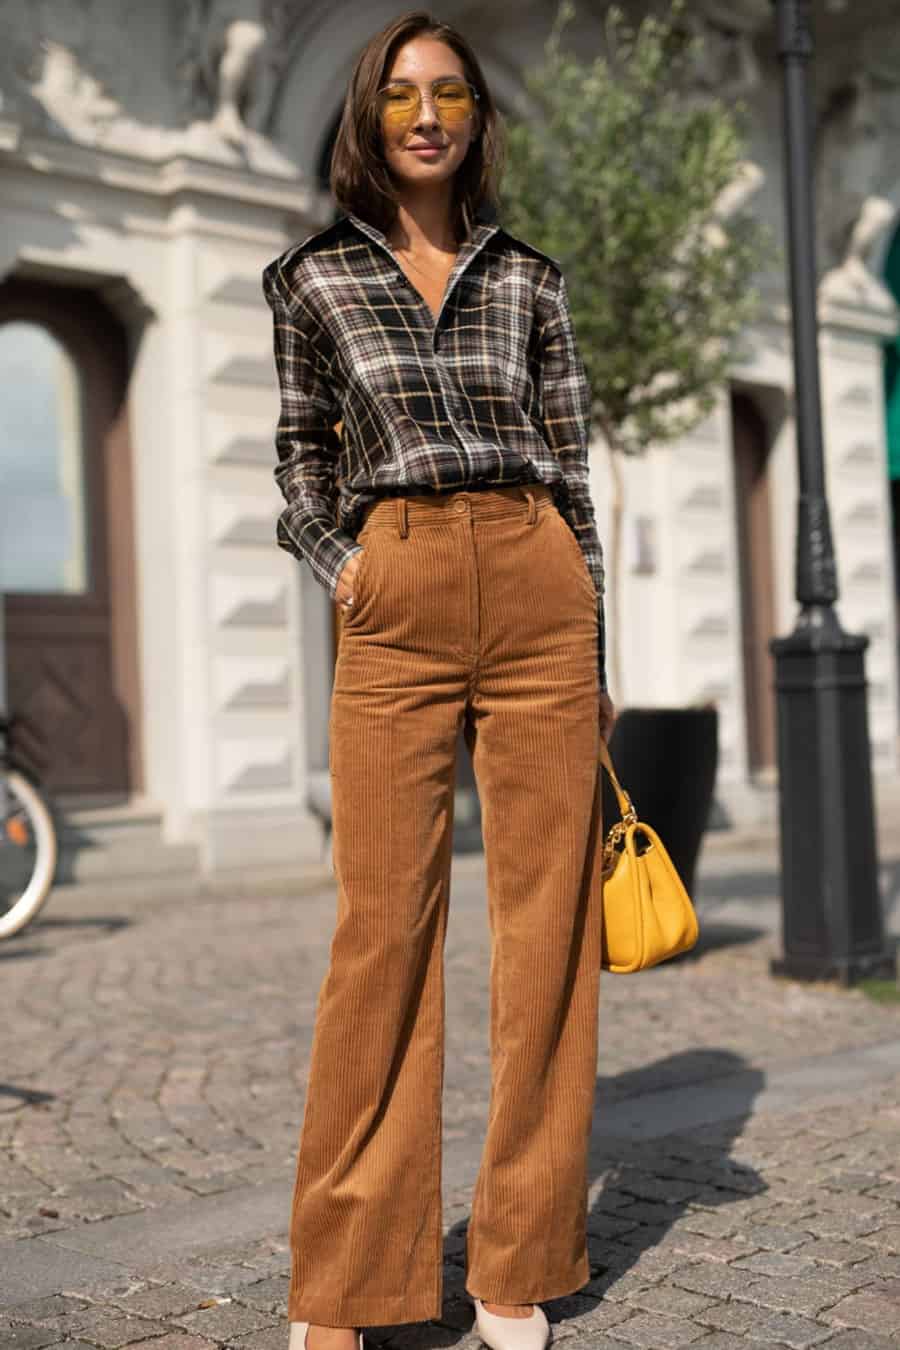 Flannel shirt with brown pants